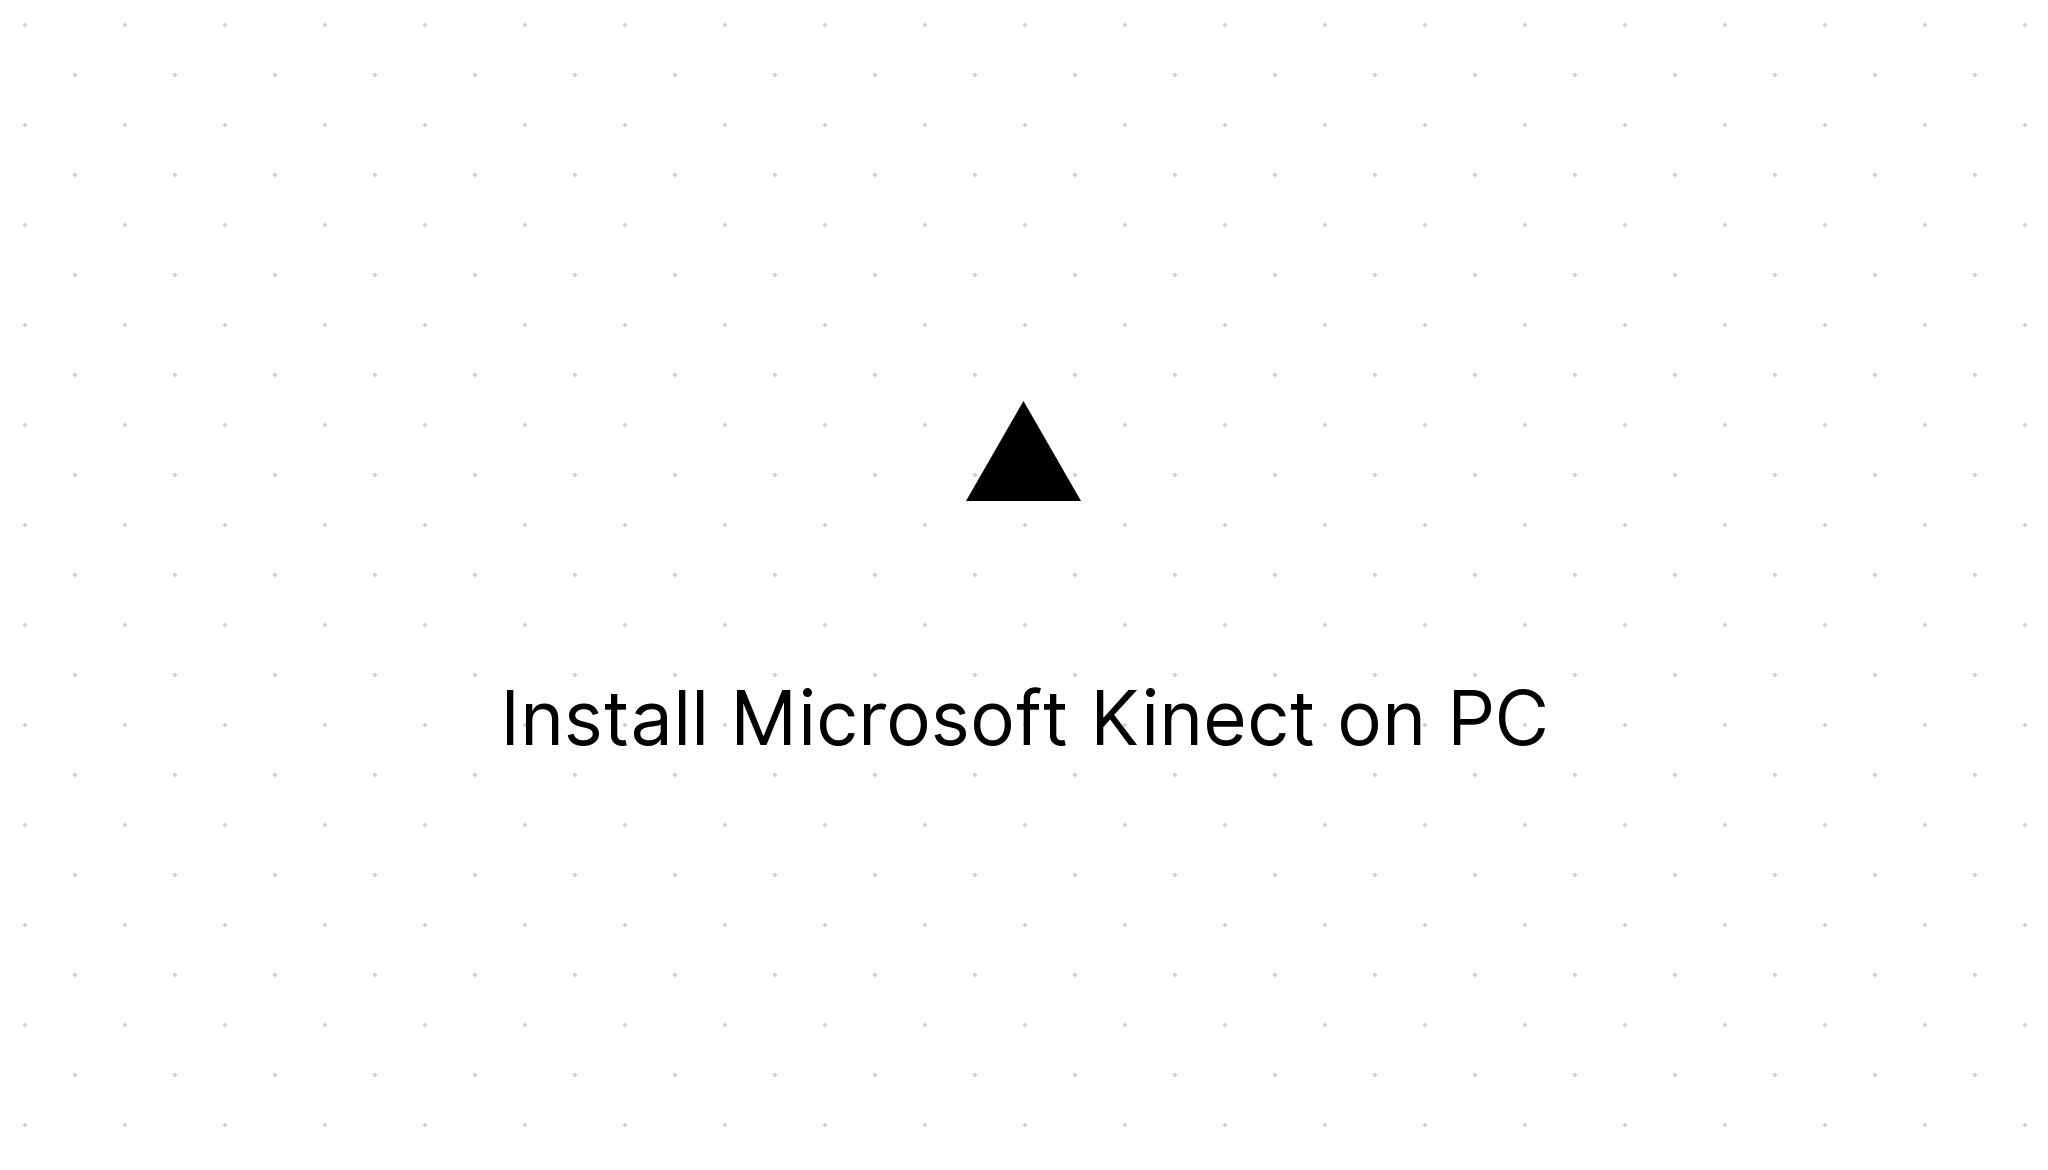 Cover Image for Install Microsoft Kinect on PC